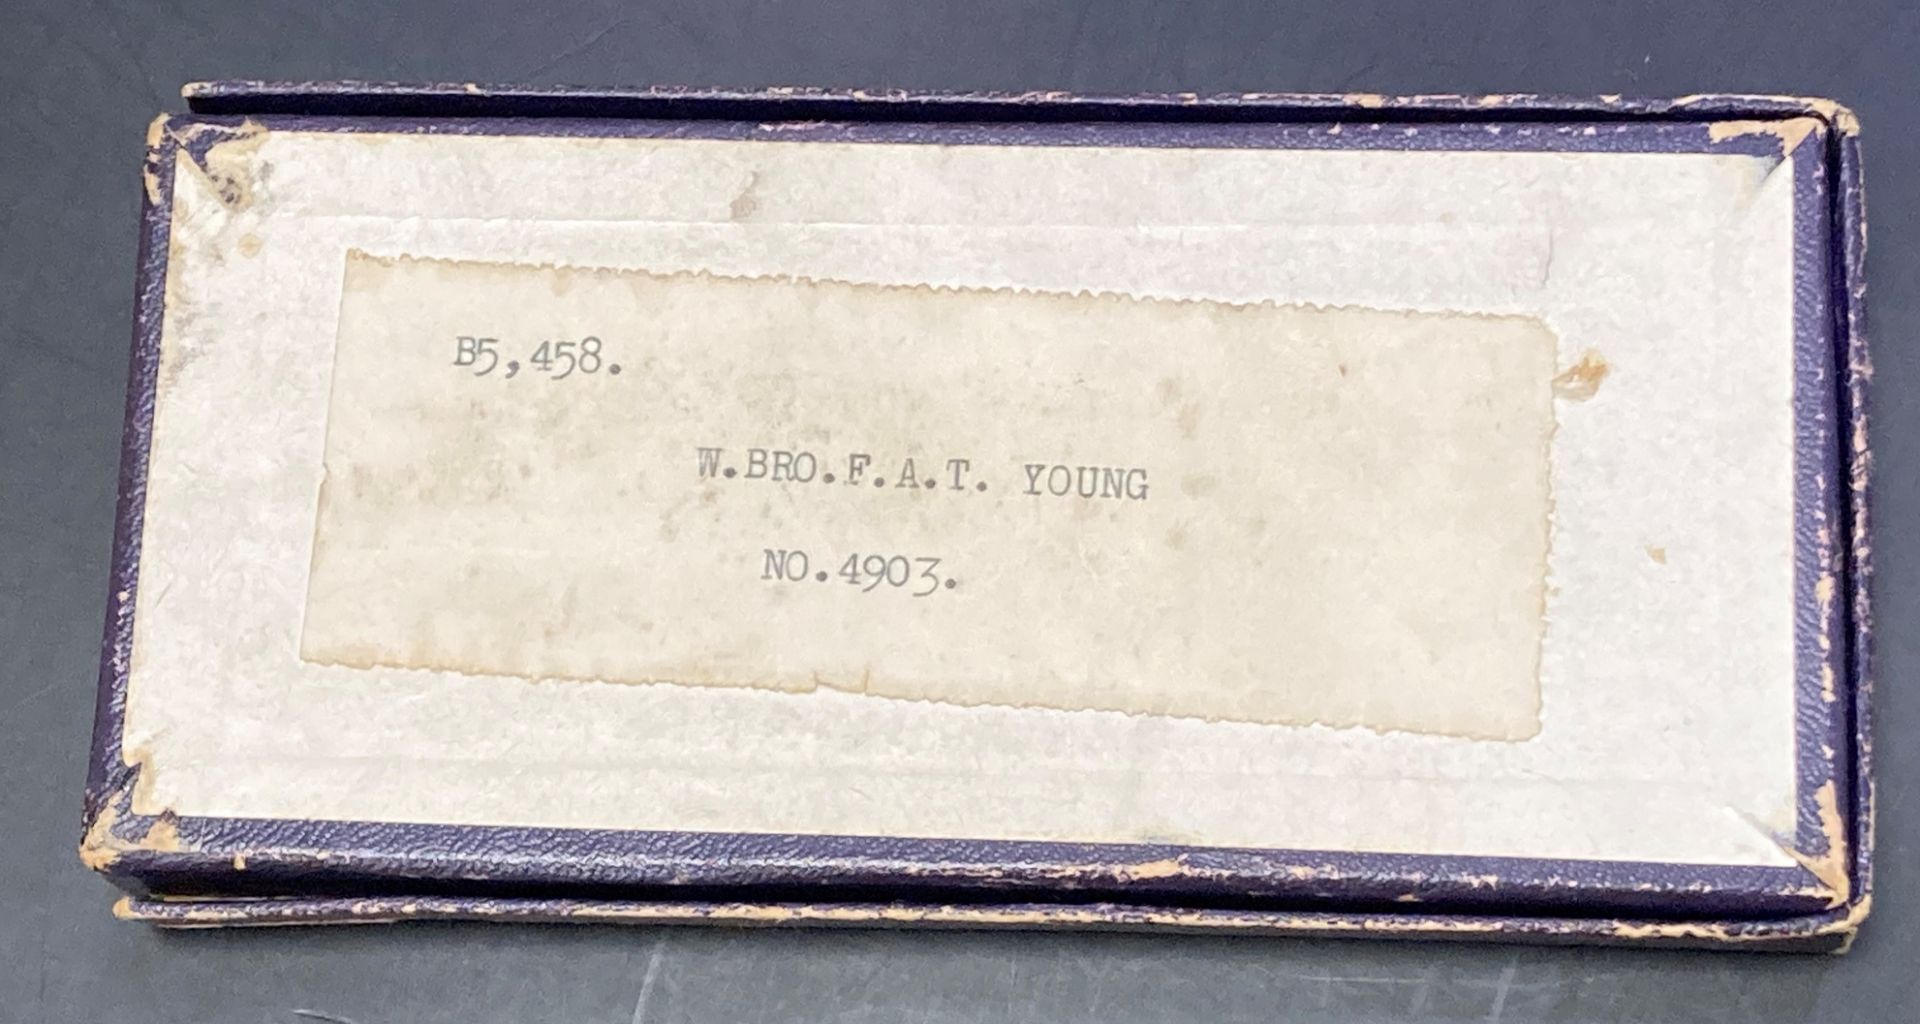 Masonic jewel in named fitted box of issue named to W. Bro. F.A.T. Young, no. - Image 4 of 4